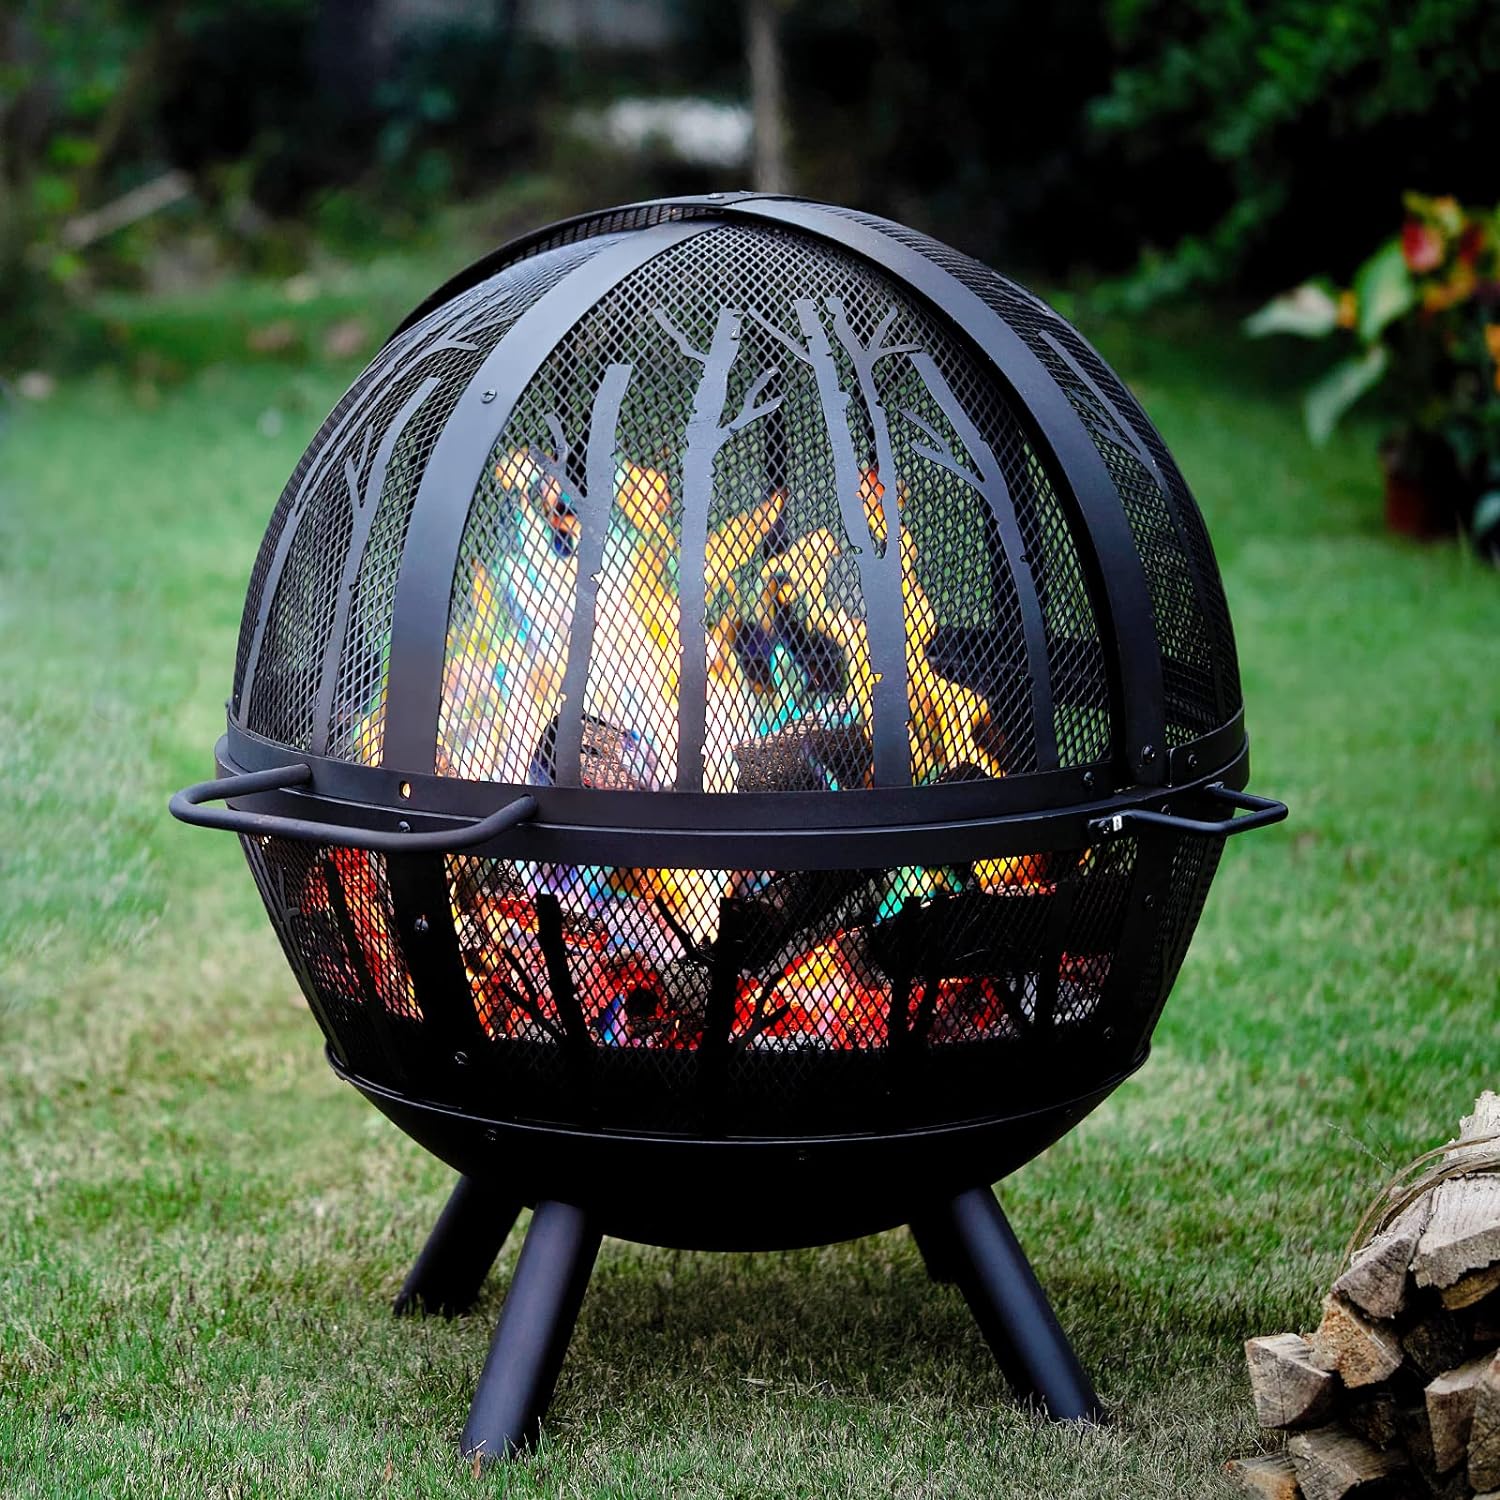 35 inch Flaming Ball Fire Pit for Outside, Bonfire Wood Burning Fire Pit with Spark Screen, Tree Pattern for Patio Backyard Garden